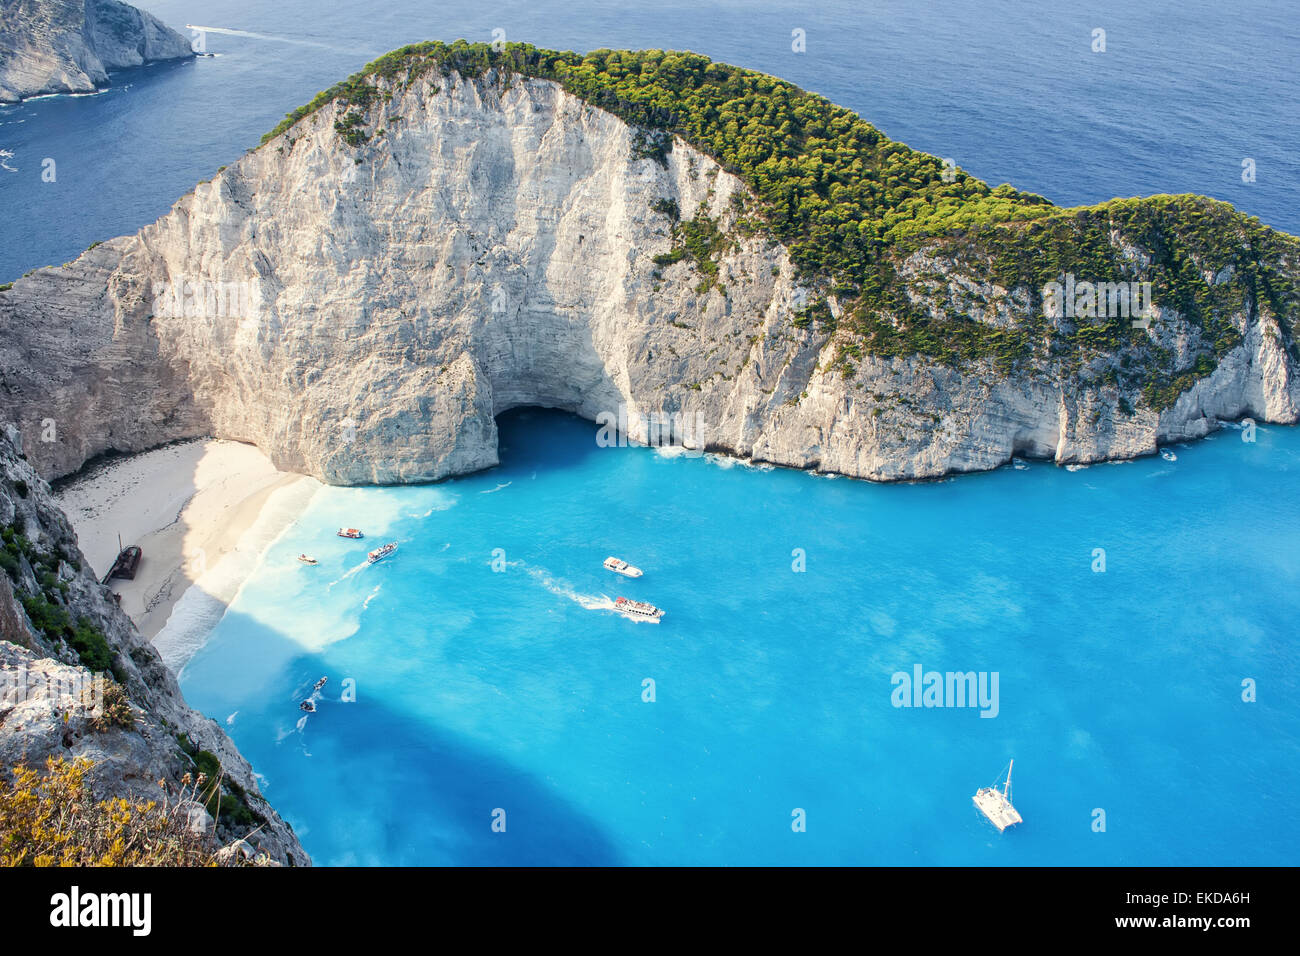 The amazing Navagio beach in Zante, Greece, with the famous wrecked ship Stock Photo